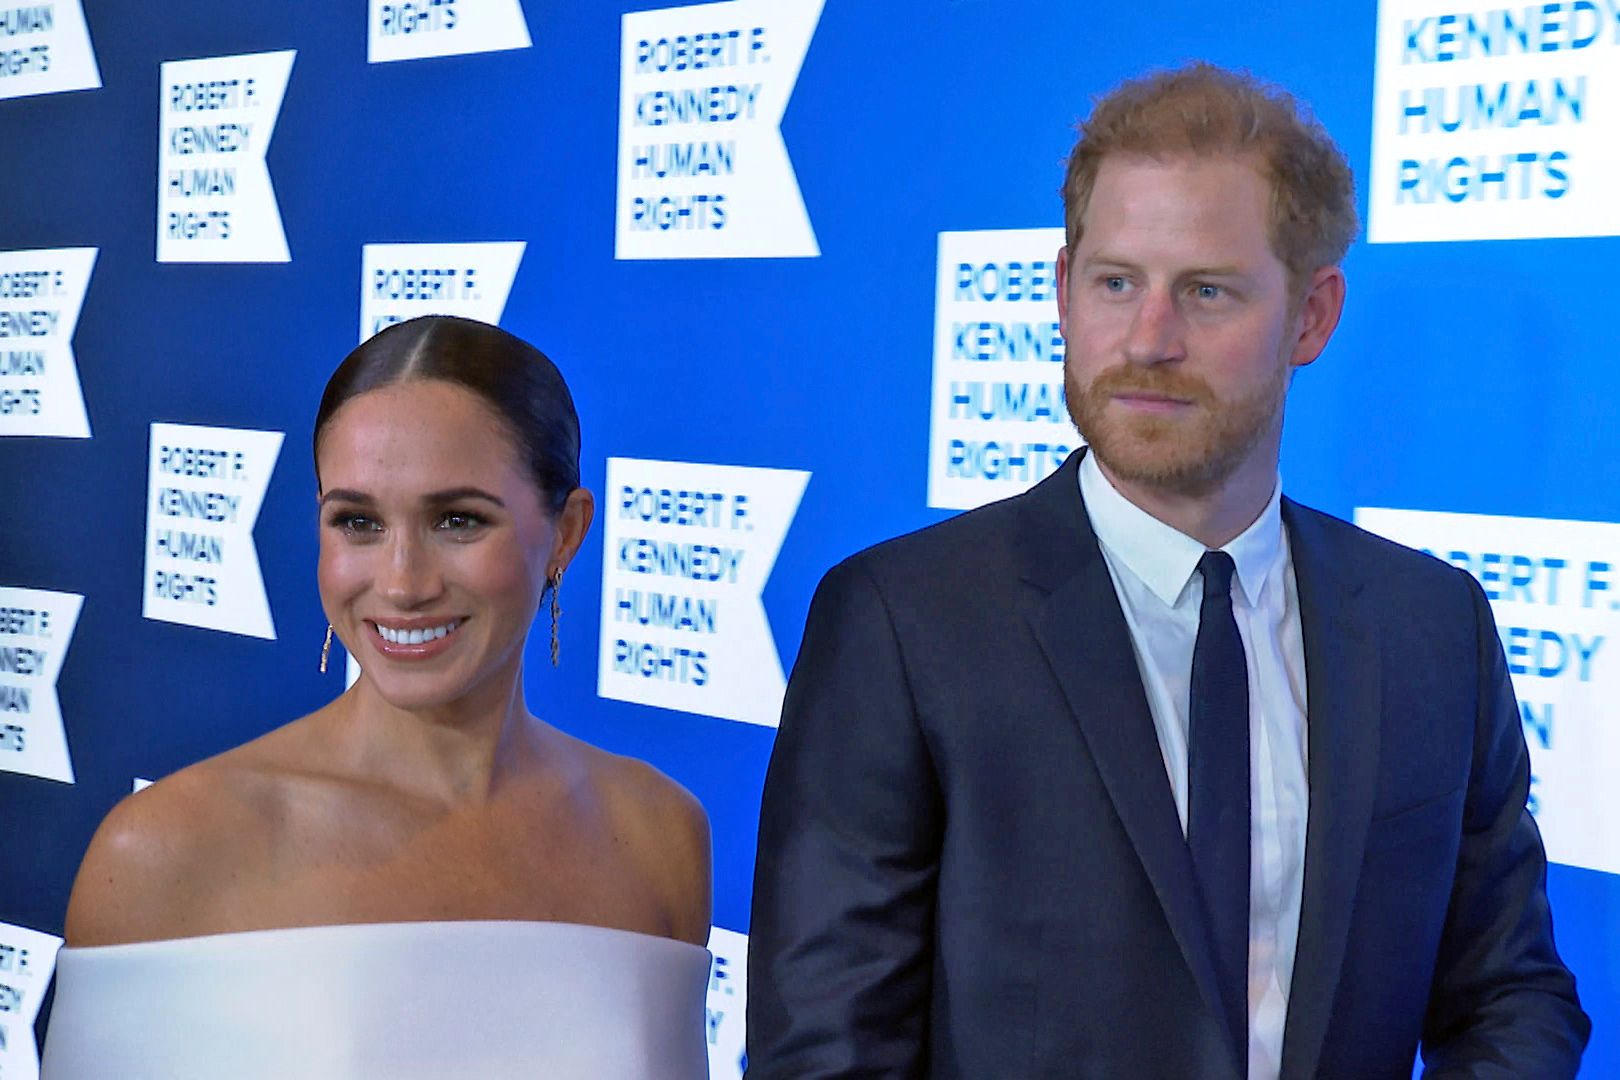 Medium shot of Harry and Meghan. Meghan has her hair in a slicked back low bun wearing a white dress and Harry is wearing a blue suit with white T-shirt and blue tie.